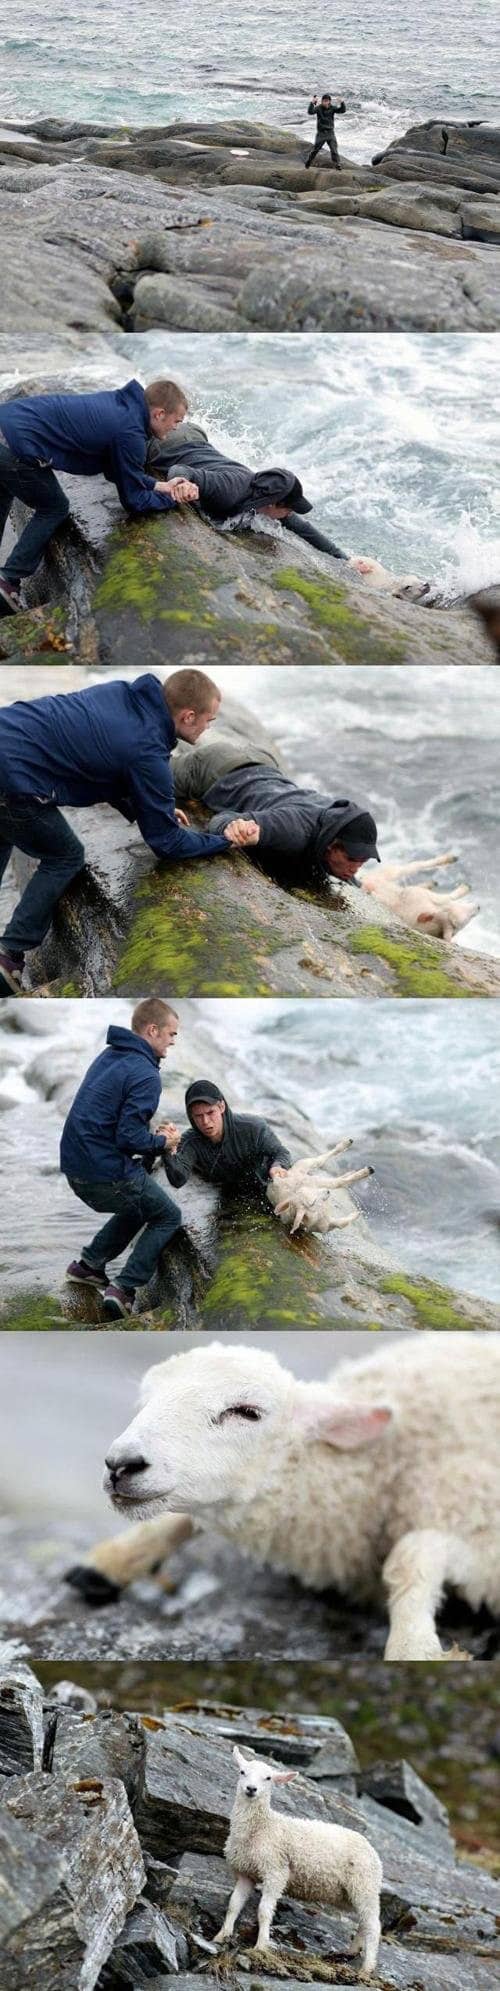 2. These two men are Norwegian heroes who rescued a sheep from the ocean

So many questions:
a) How did the sheep end up in the ocean?
b) Was it going for a dip to cool off before remembering it can't swim?
c) Does stuff like this happen all the time in Norway? 
d) Are they single?